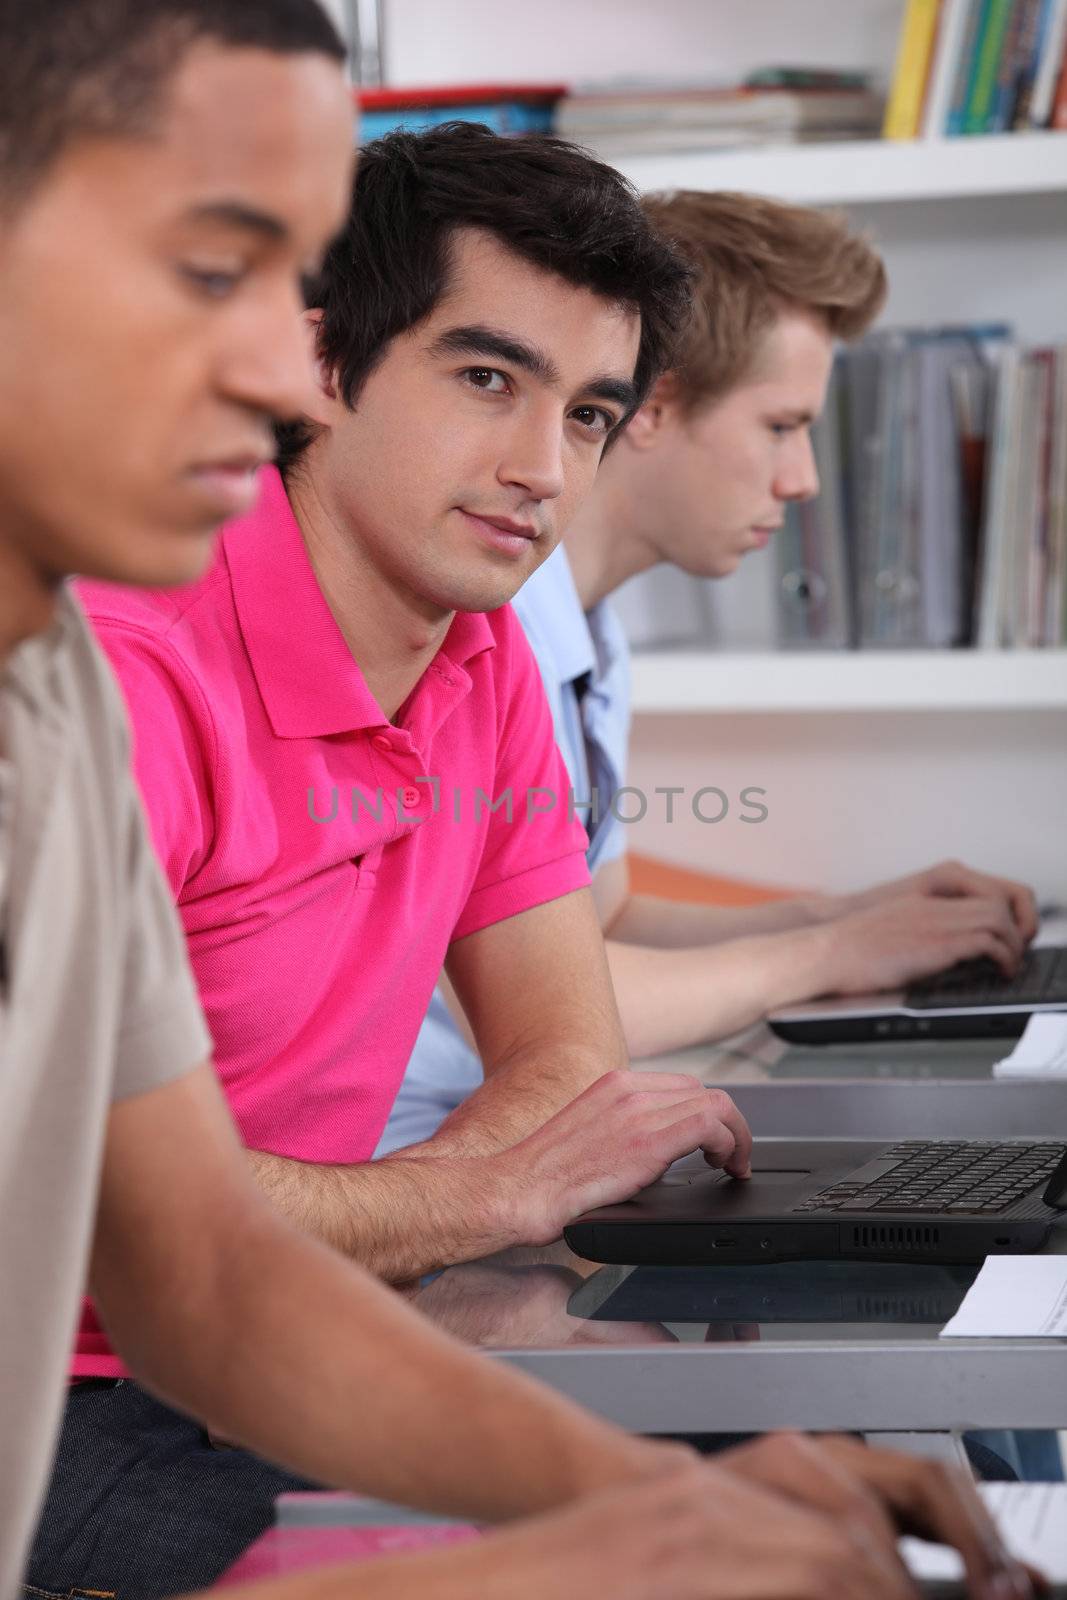 Older students with laptops by phovoir